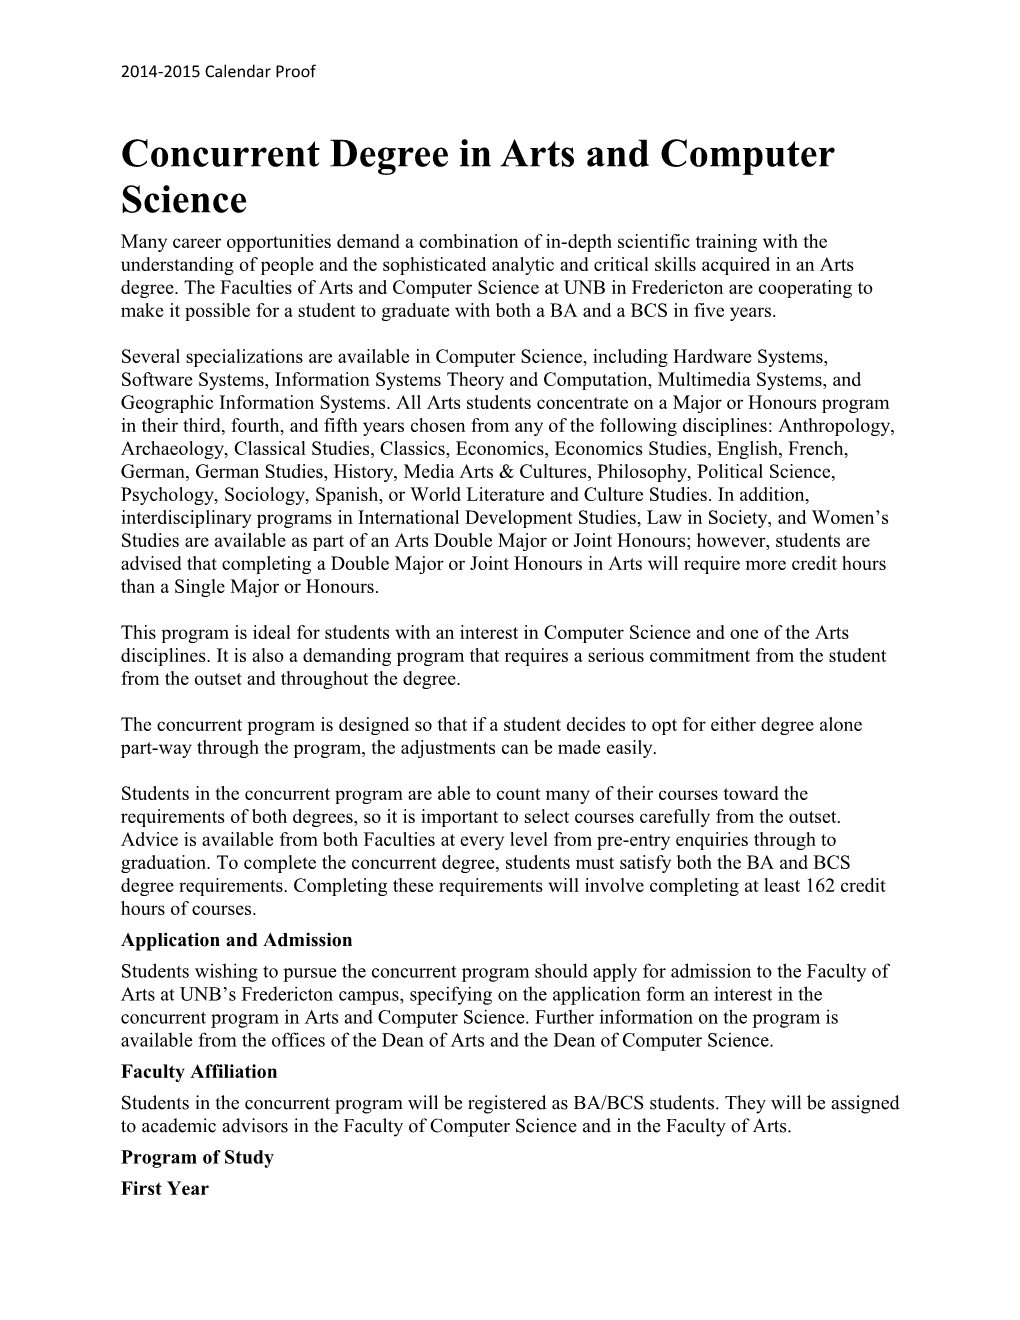 Concurrent Degree in Arts and Computer Science